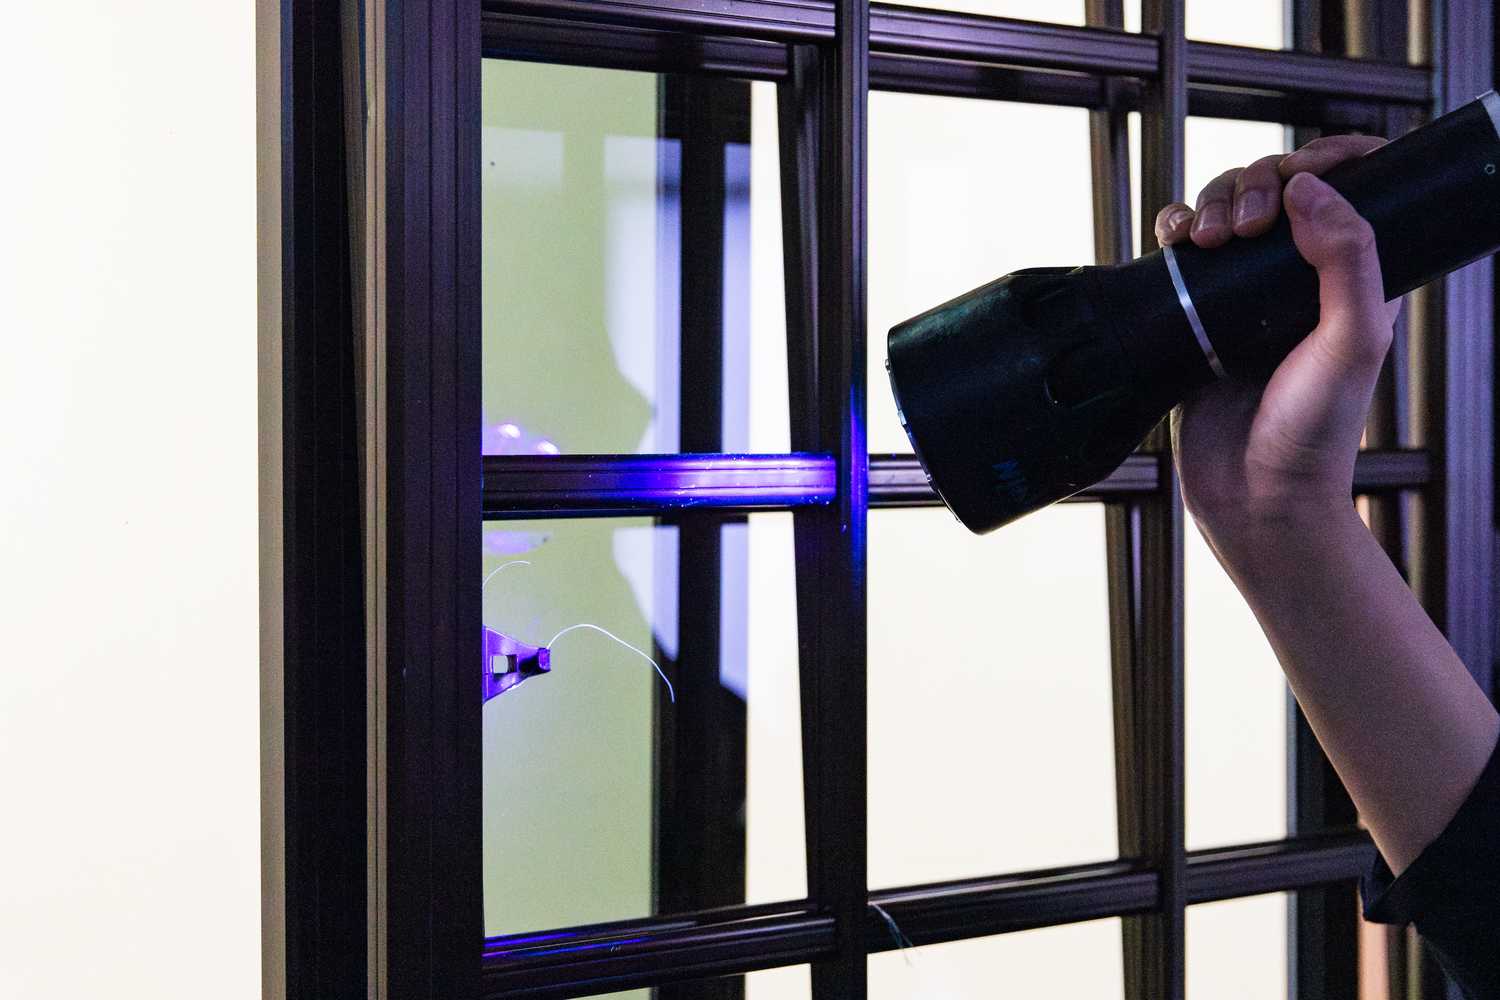 A Forensic Specialist's hand is seen holding a Forensic light source containing ultraviolet light and shining it on a window grill. Under the light of the Forensic light source, some trace evidence is seen, which is previously not visible under the naked eye and under normal light conditions.